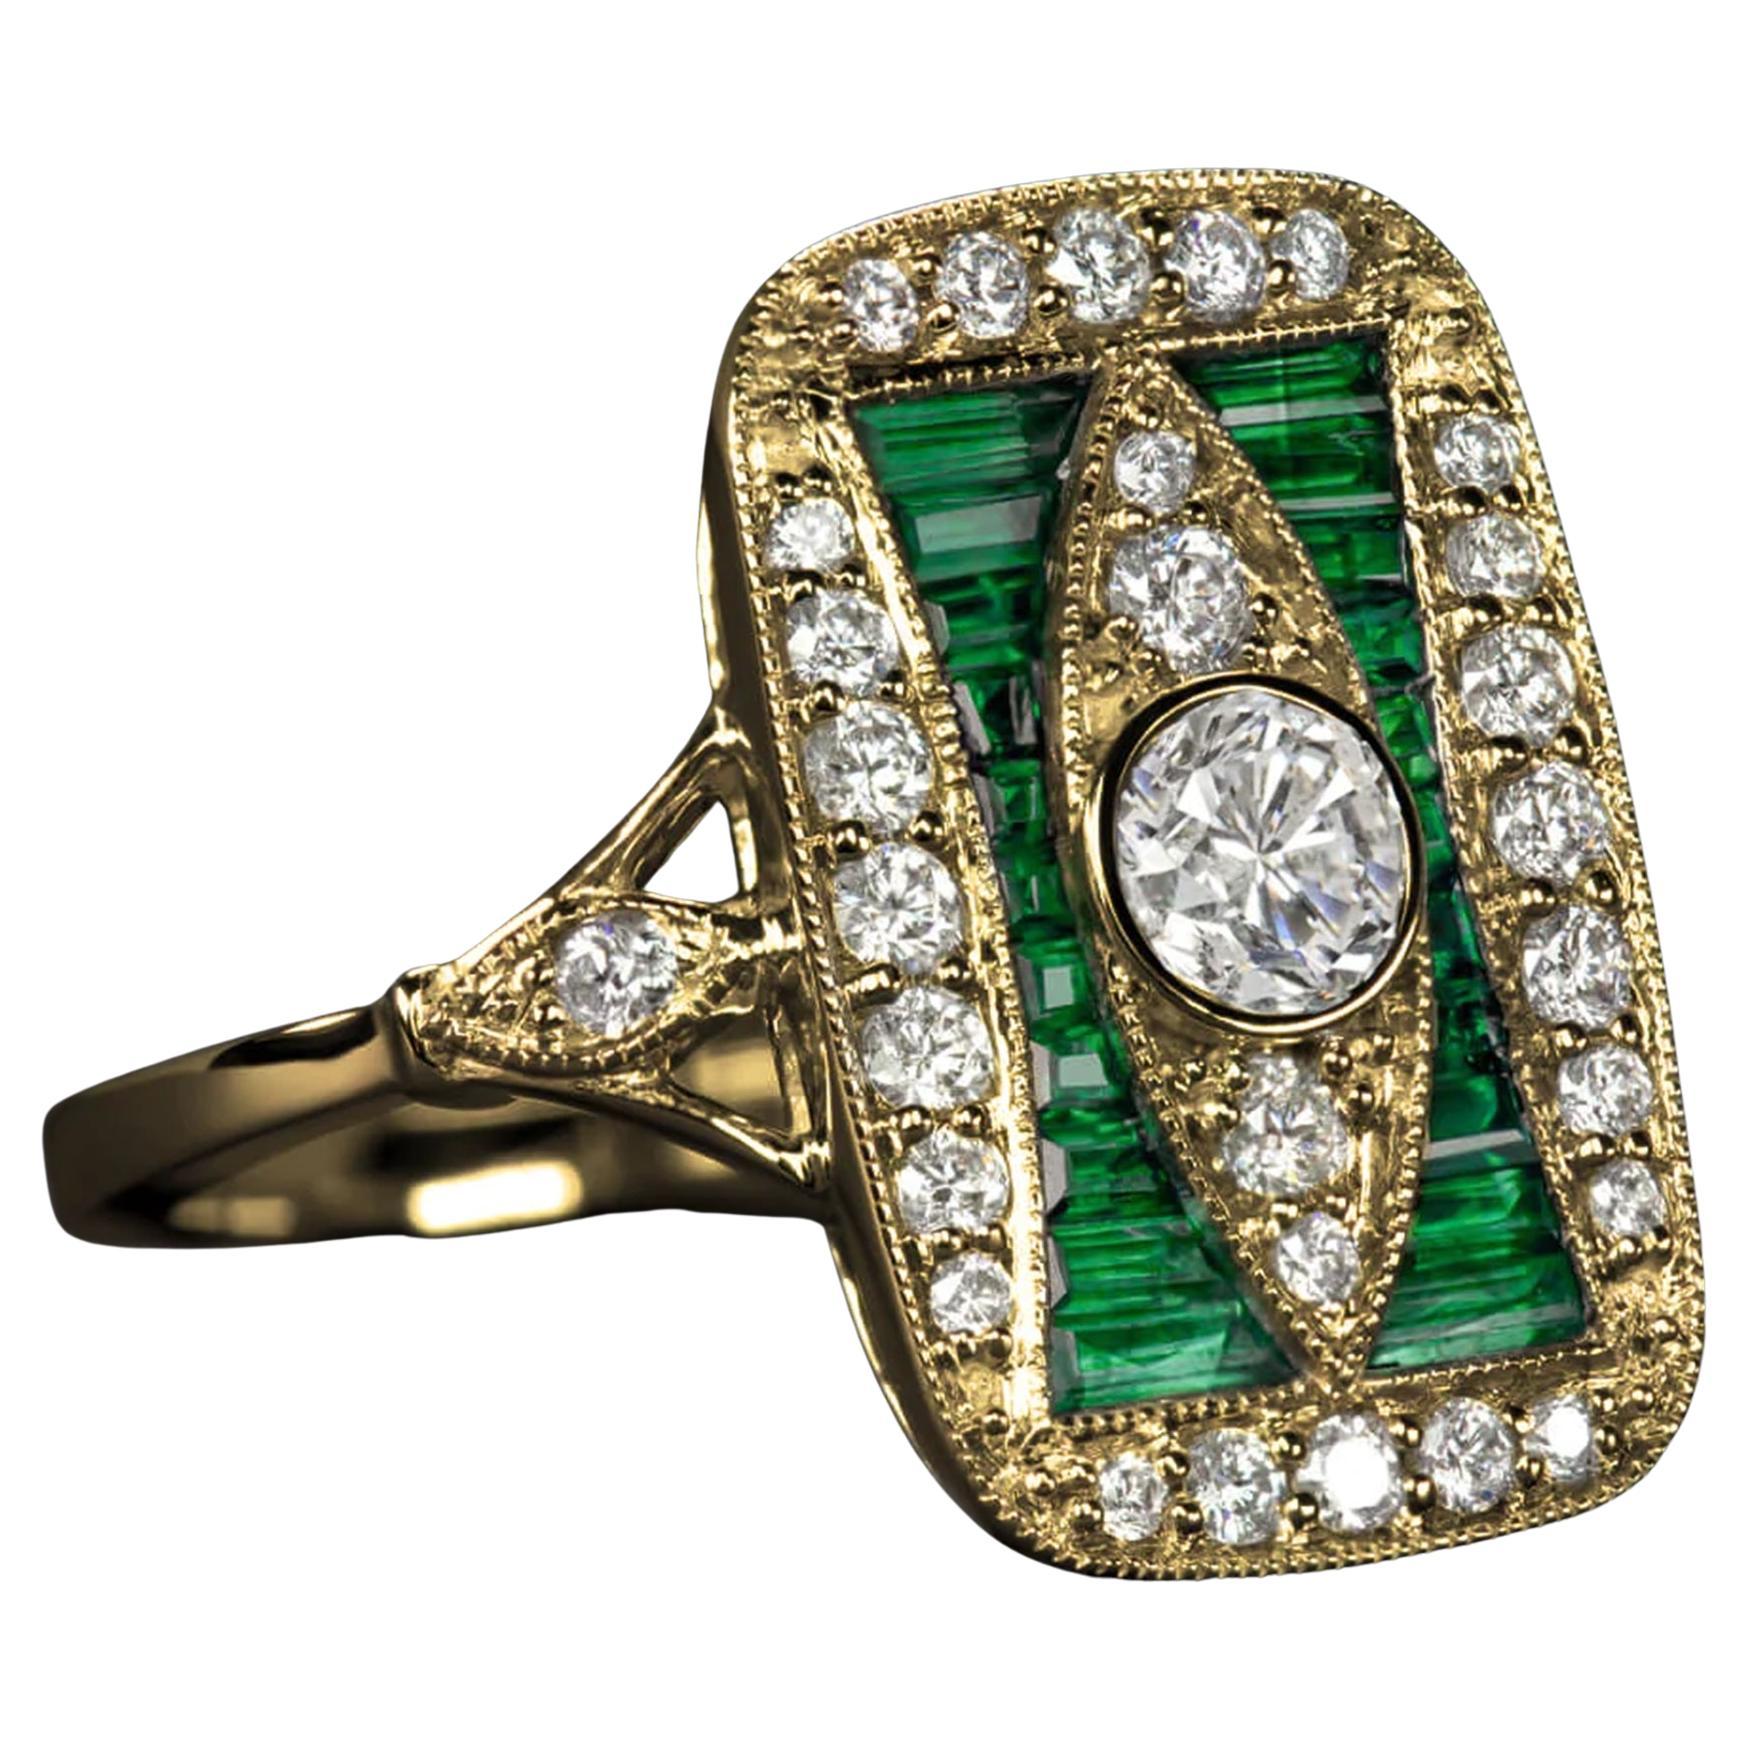 This exquisite ring showcases the timeless beauty of Art Deco design, featuring a dazzling combination of natural diamonds and emerald gemstones.

Key Features:

The centerpiece of this ring is a vibrant 0.25-carat round-cut diamond, which serves as